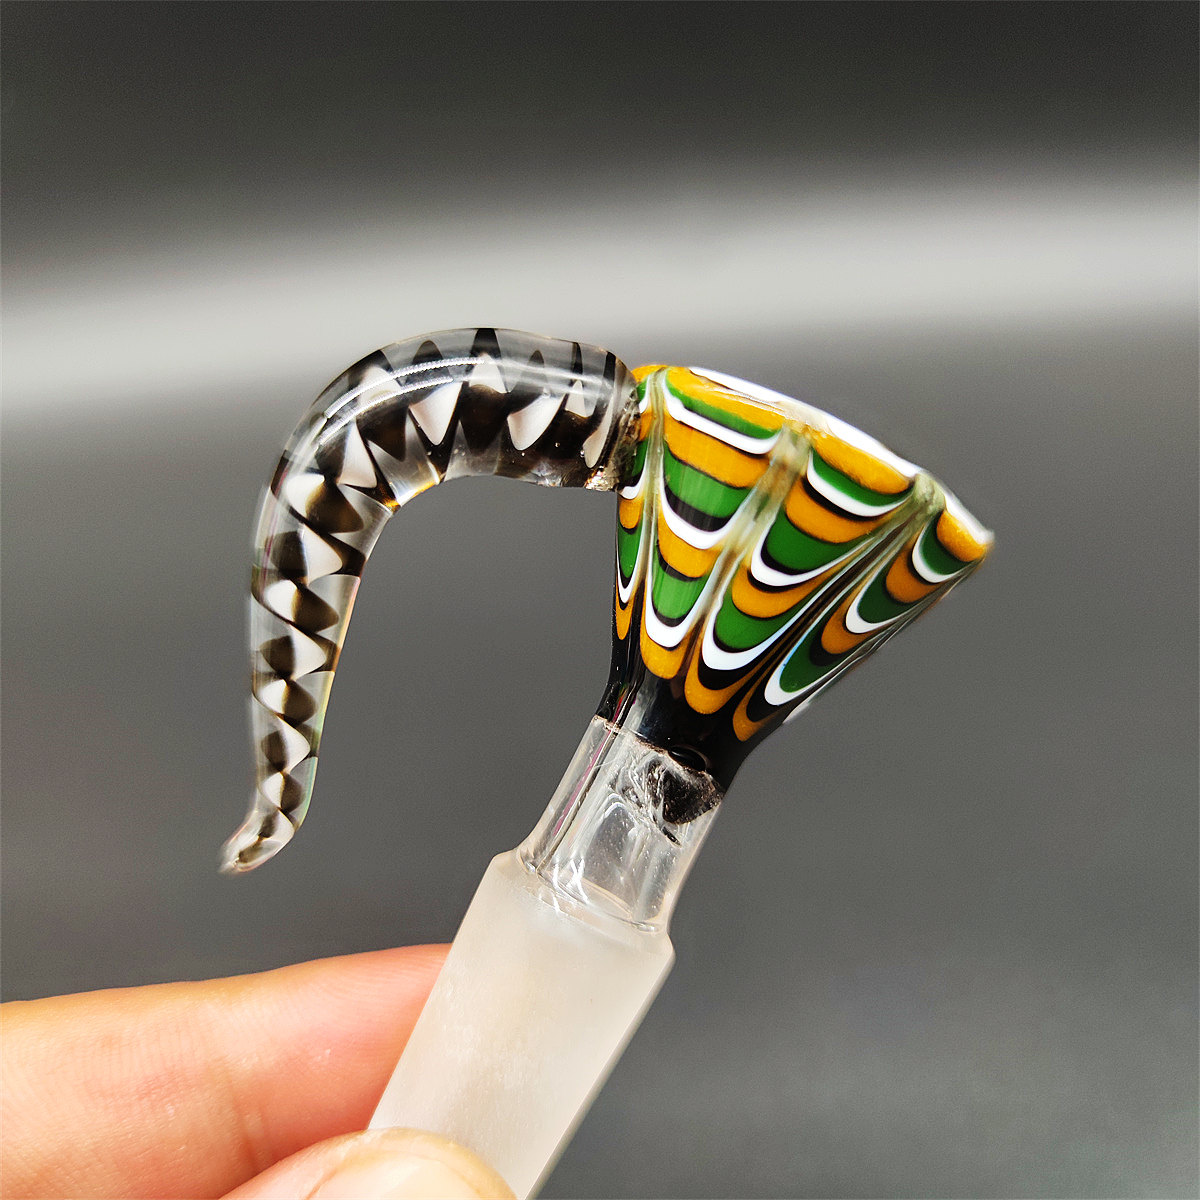 2023 Wig Wag 14mm Thick Bowl Piece Bong Glass Slide Water Pipes Cream Peacock Feather Horn Holder Tip Heady Slides Colorful Bowls Male Smoking Accessory